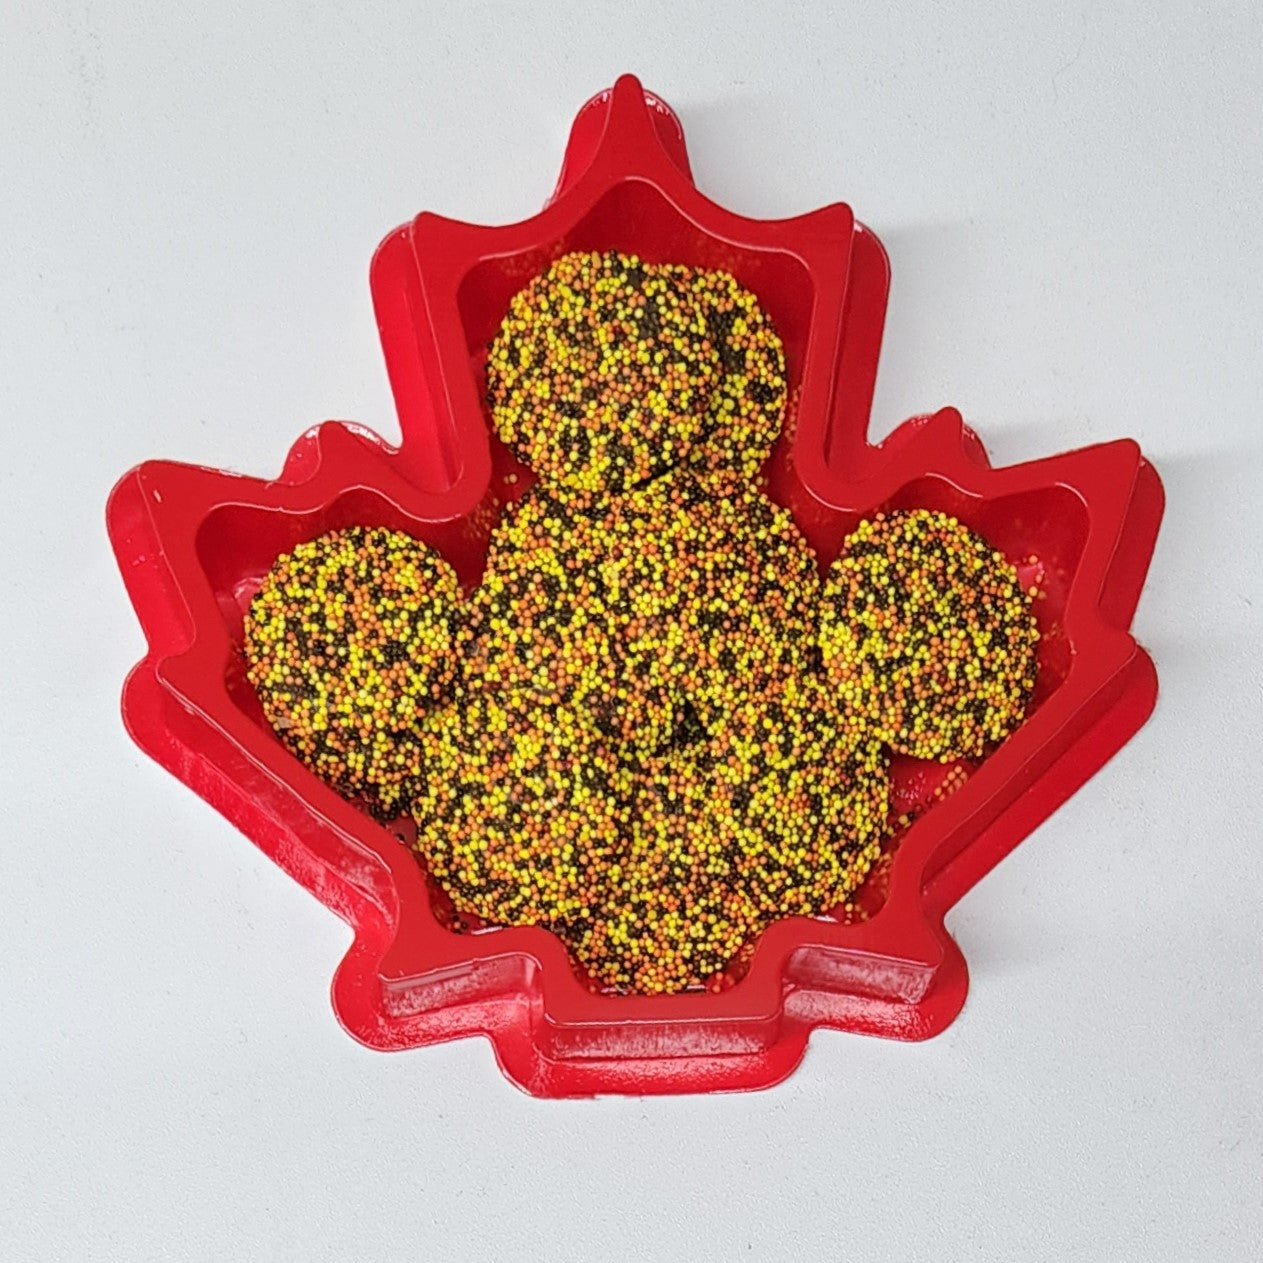 Fall-Colored Nonpareils in a Red Leaf Box